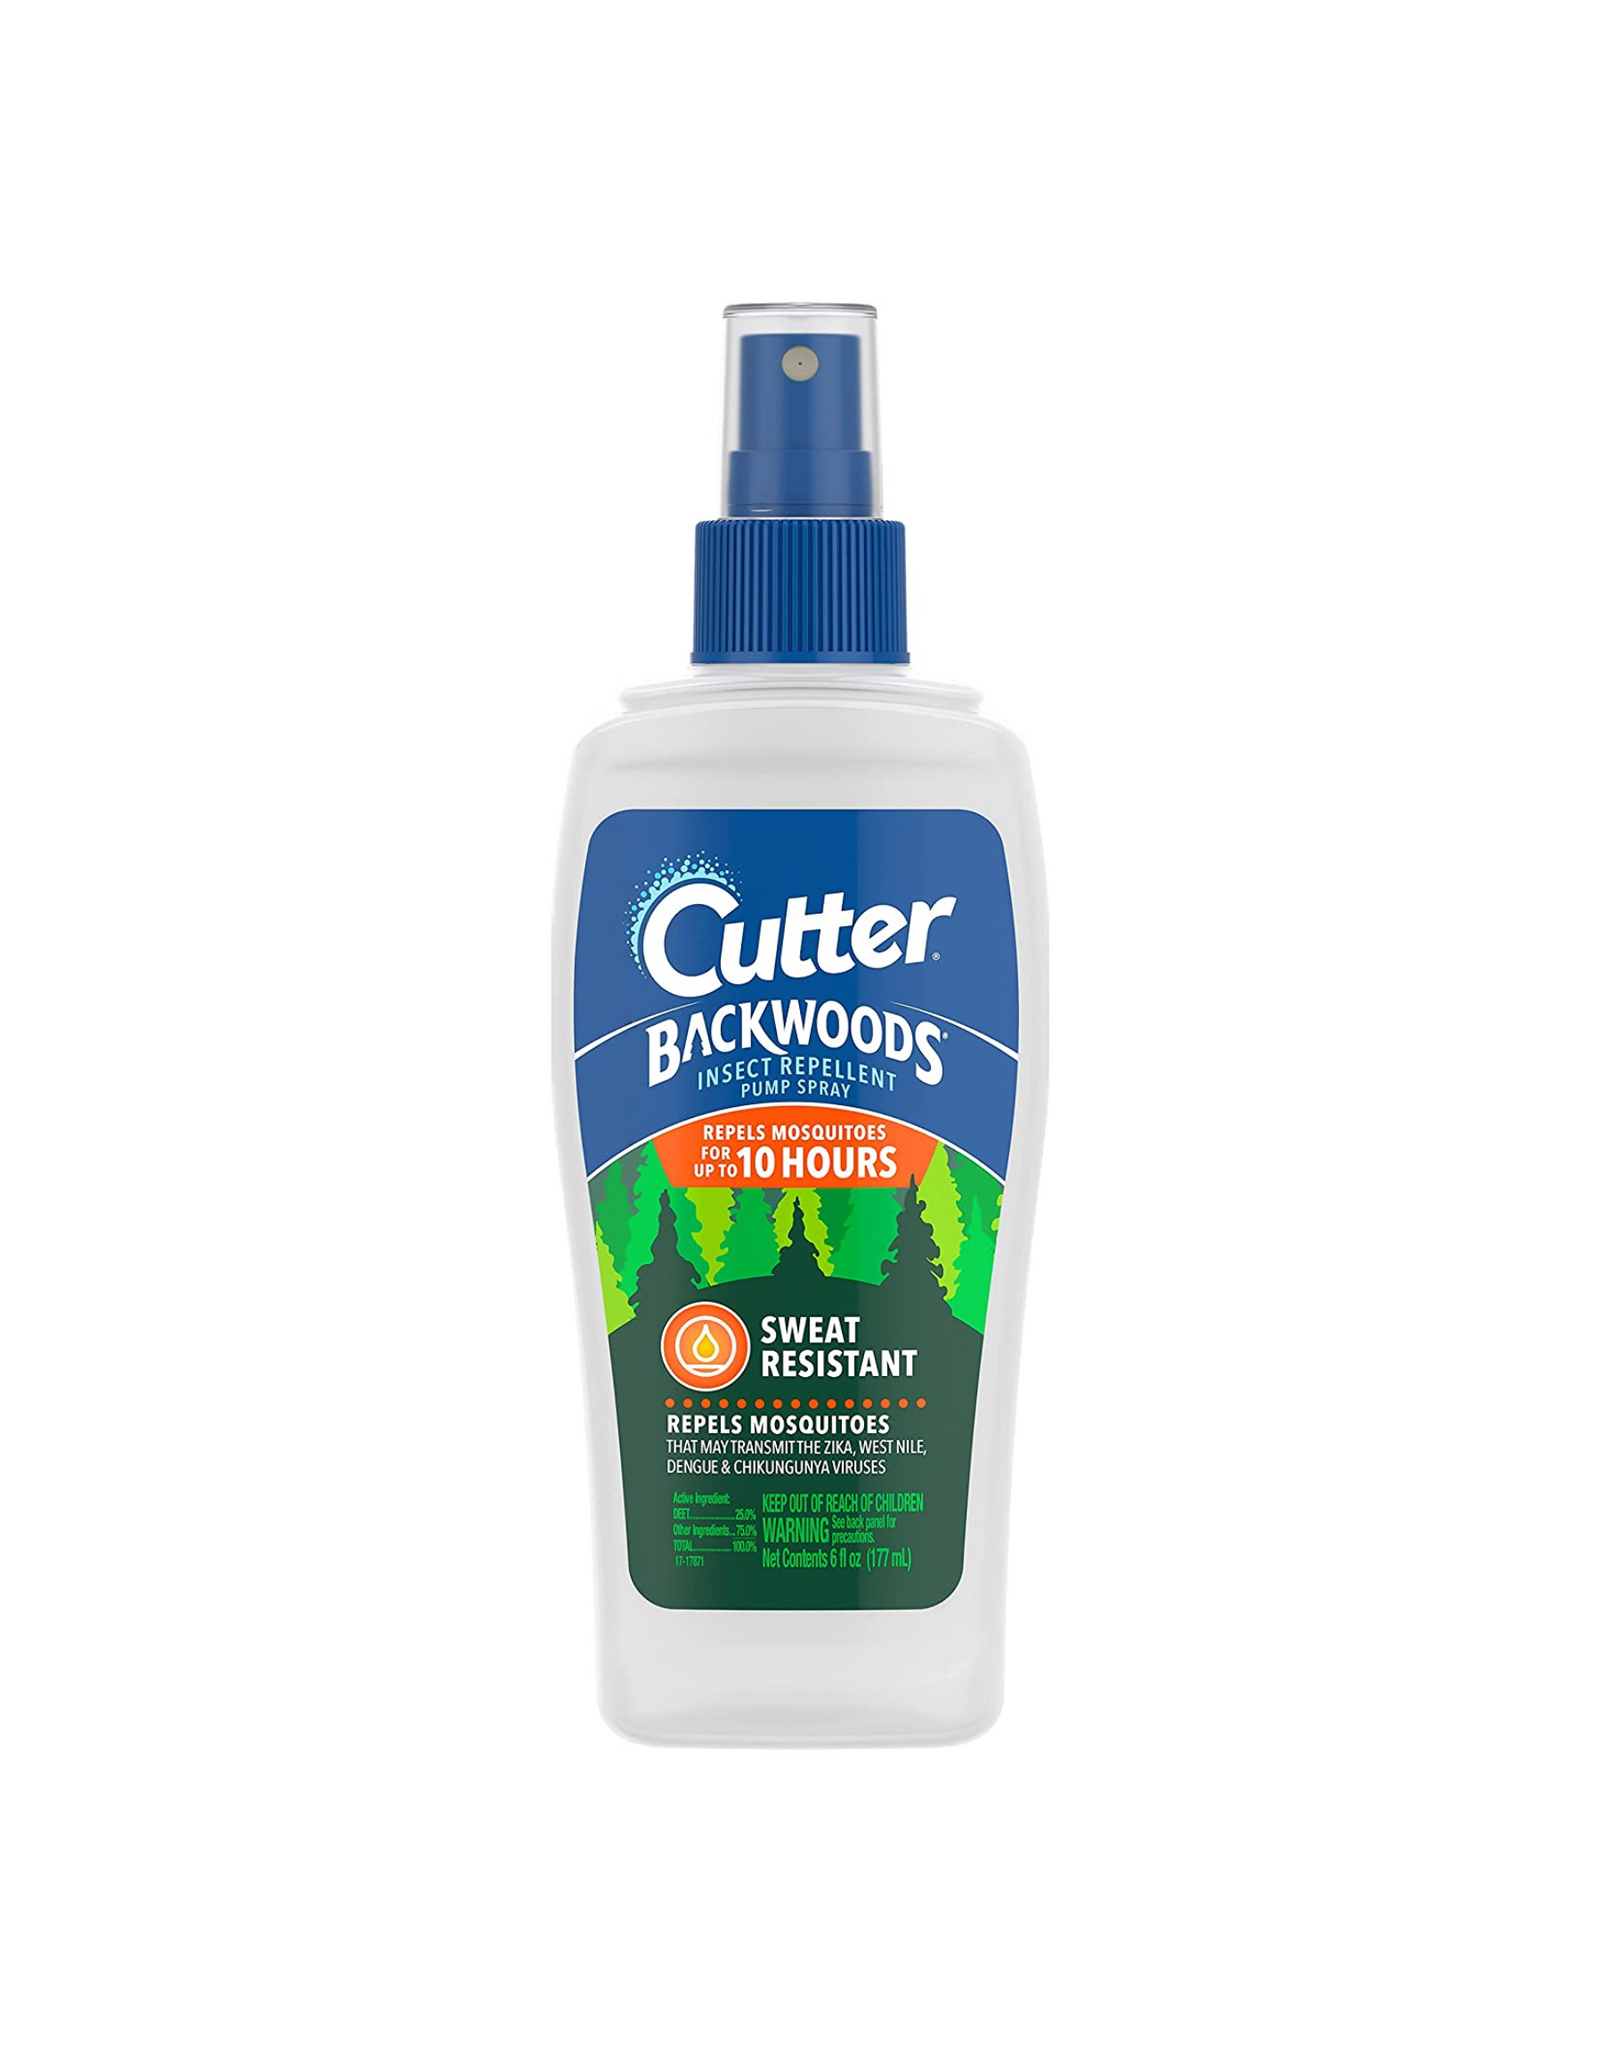 Cutter Backwoods Insect Repellent Pump Spray, Sweat Resistant, 6 fl oz